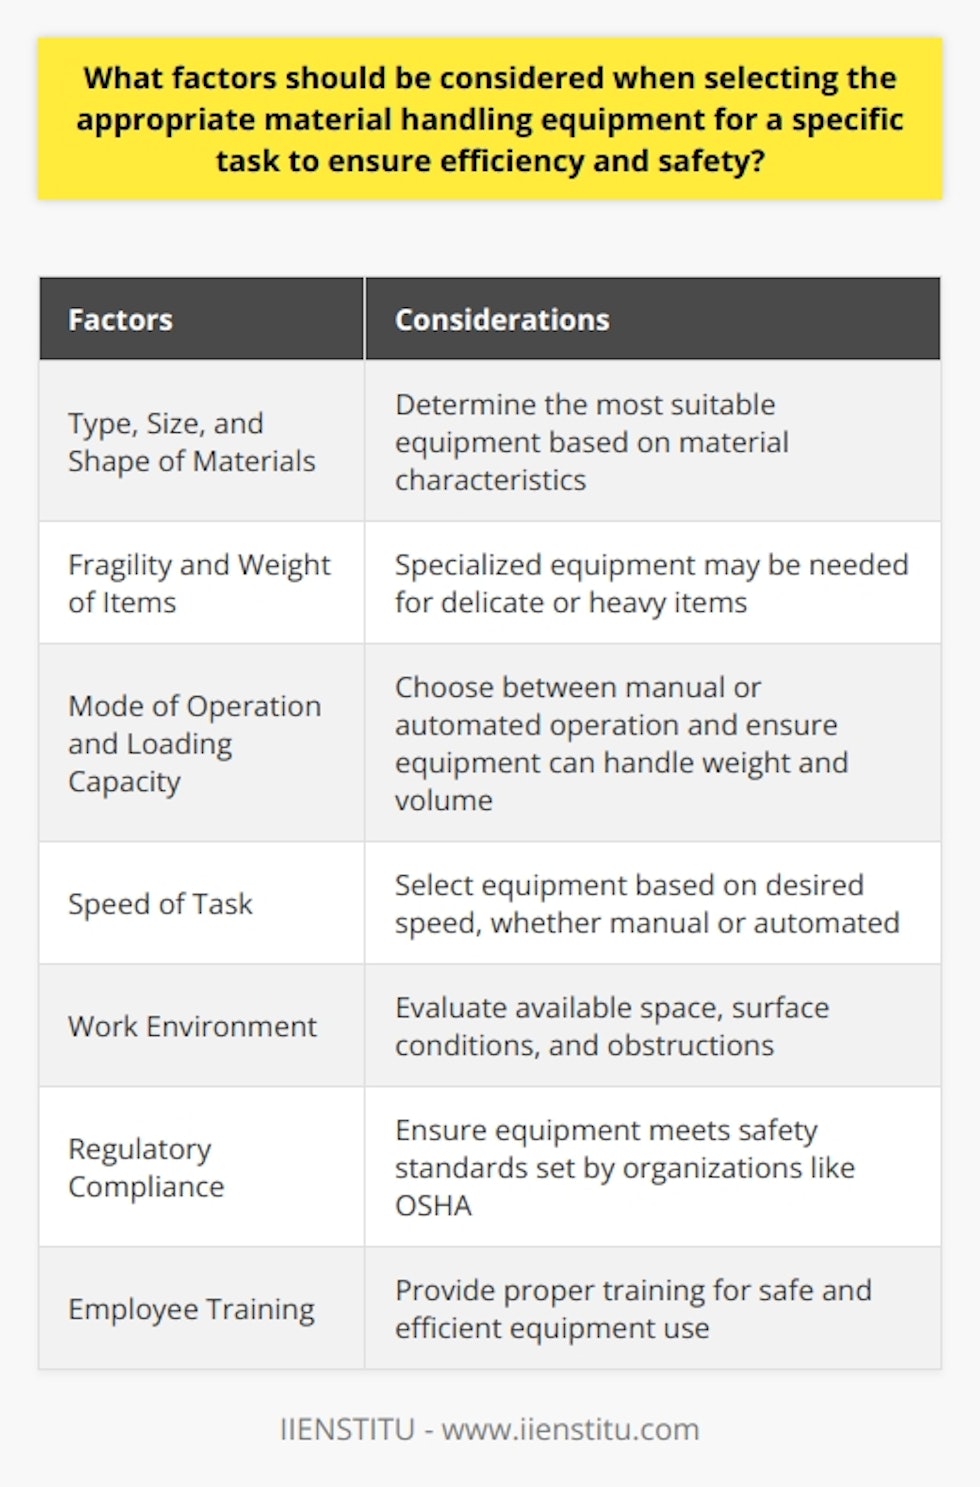 When selecting the appropriate material handling equipment for a specific task, there are several factors that need to be considered to ensure efficiency and safety.Firstly, it is important to carefully examine the type, size, and shape of the materials that need to be handled. Different materials require different handling methods, and understanding their characteristics will help determine the most suitable equipment.The fragility and weight of the items also need to be taken into account. Delicate or heavy items may require specialized equipment, such as cushioned or heavy-duty lifting devices, to ensure they are handled safely.The mode of operation and the loading capacity of the equipment are also crucial factors. Depending on the task, equipment may need to be manually operated or automated. Additionally, the equipment must have the appropriate capacity to handle the weight and volume of the materials.The speed at which the task needs to be carried out is another consideration. A high-speed operation may require automated material handling systems, while a slower pace may be more suitable for manual equipment.The work environment is another important factor to consider. The available space, surface conditions, and existence of obstructions should be evaluated. In a tight space, compact and maneuverable equipment is preferable, while rough surfaces may necessitate sturdy machines that can handle uneven ground.Regulatory compliance is also essential when selecting material handling equipment. Ensuring that the equipment meets the safety standards set by organizations such as the Occupational Safety and Health Administration (OSHA) is crucial for the well-being of employees and to minimize safety risks.Lastly, employee training is vital for the safe and efficient use of material handling equipment. Workers should receive proper training on how to operate the equipment to prevent accidents and maximize productivity. Identifying equipment that employees can use effectively, with minimal training, is key to promoting both safety and efficiency.By considering these factors, it is possible to select the appropriate material handling equipment that allows for efficient operations and minimizes safety risks.